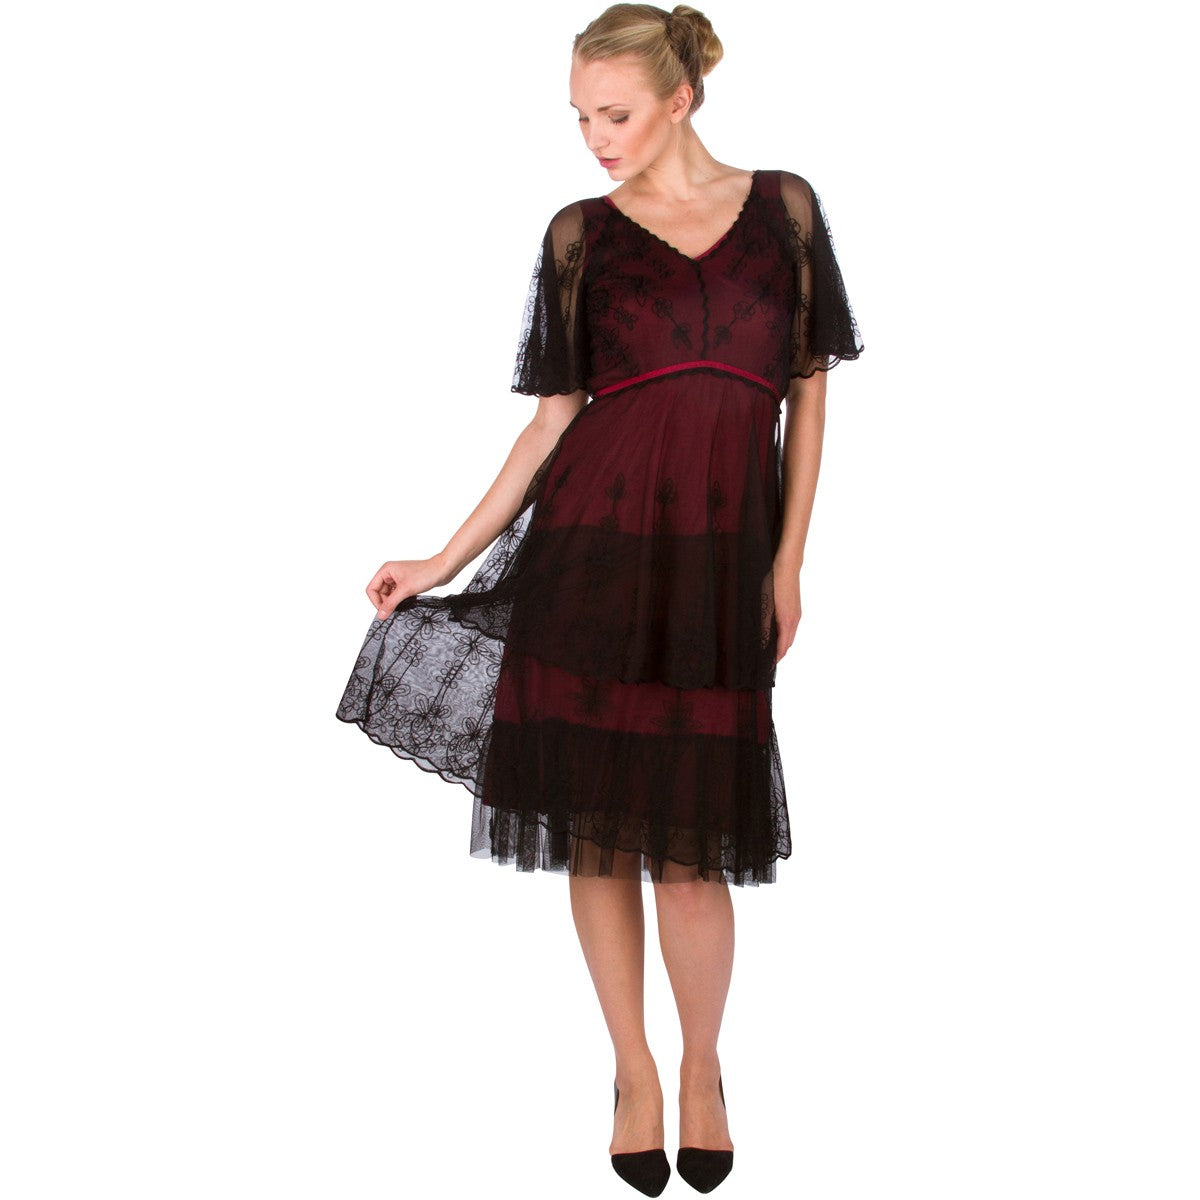 Romantic Vintage Style Short Dress in Wine Nataya - SOLD OUT